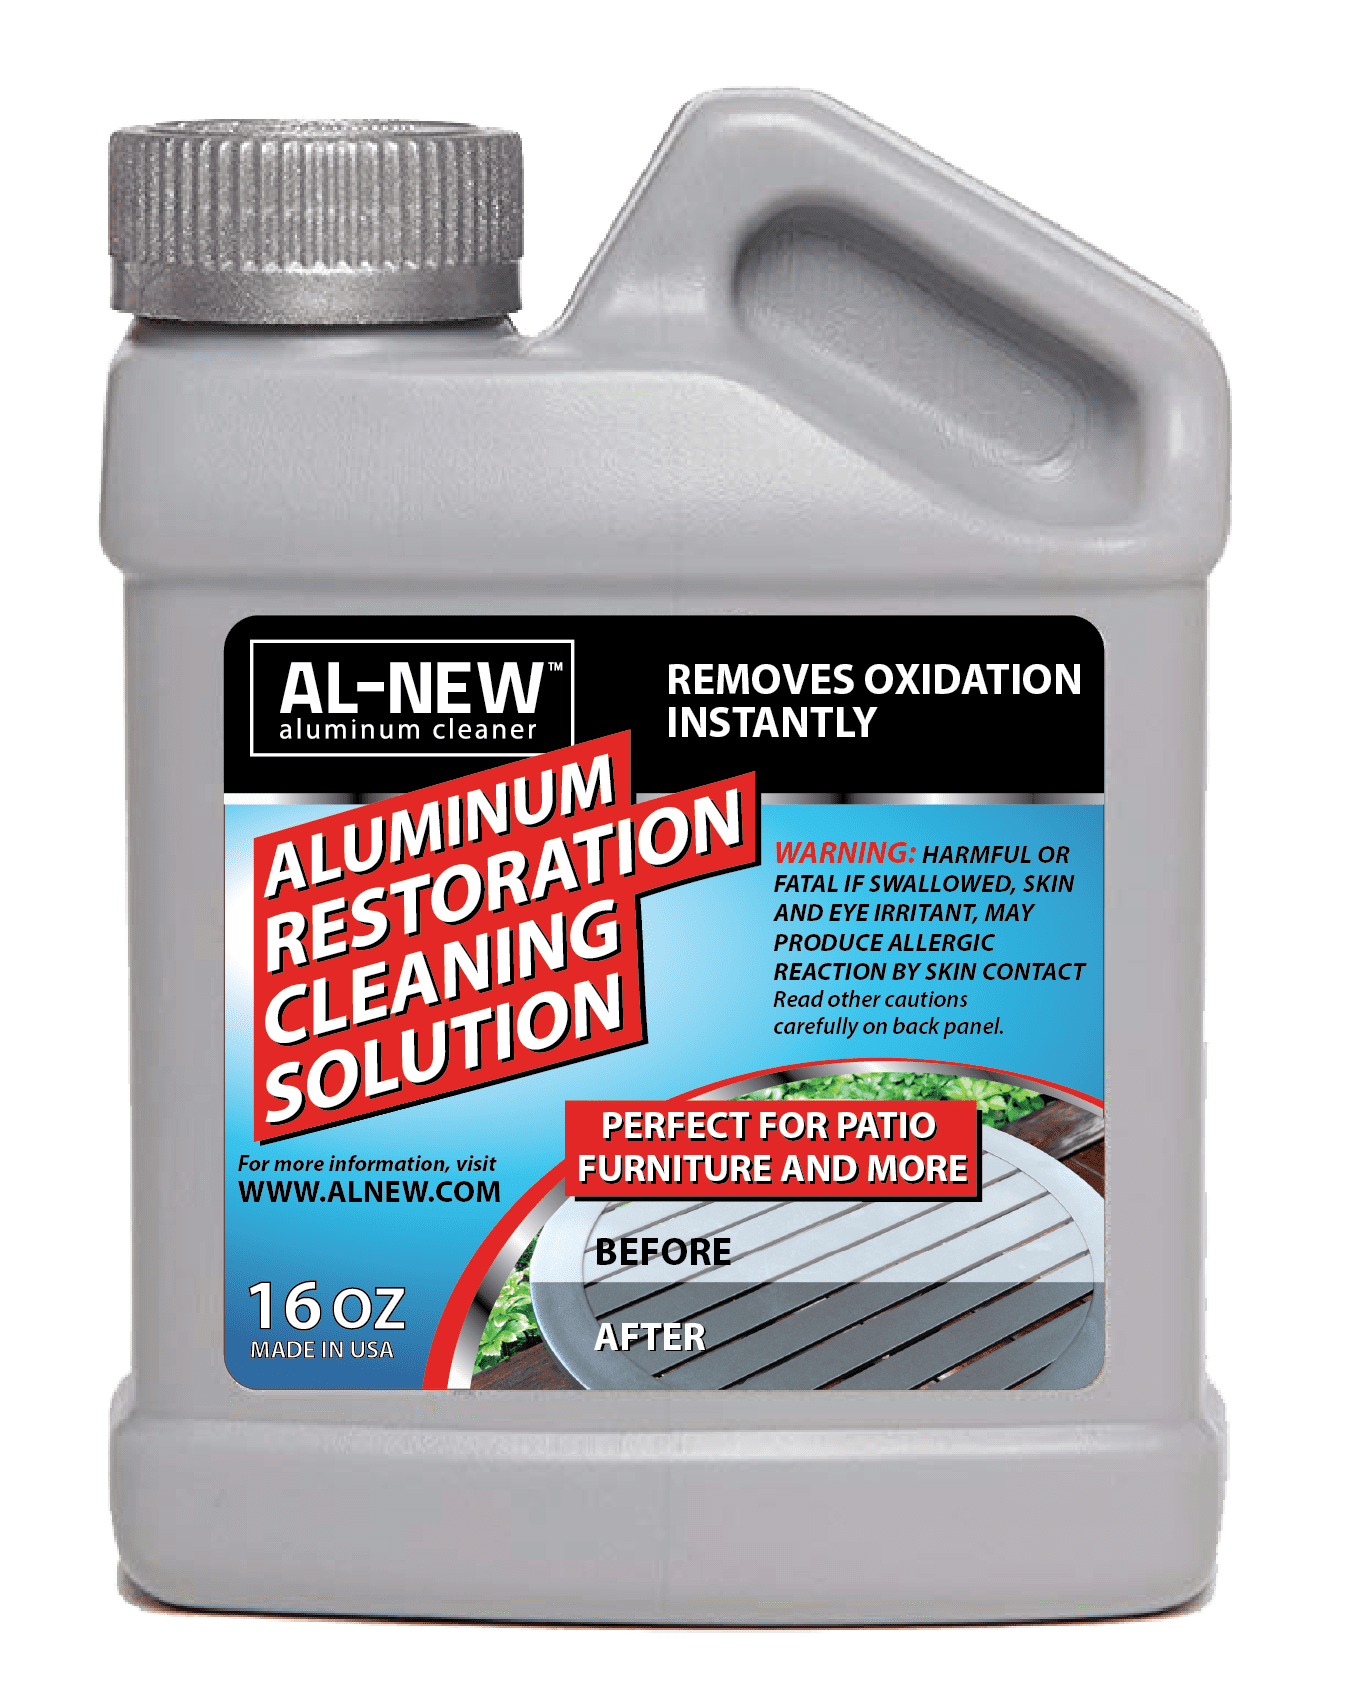 Essential Values Ice Machine Cleaner and Descaler Universal